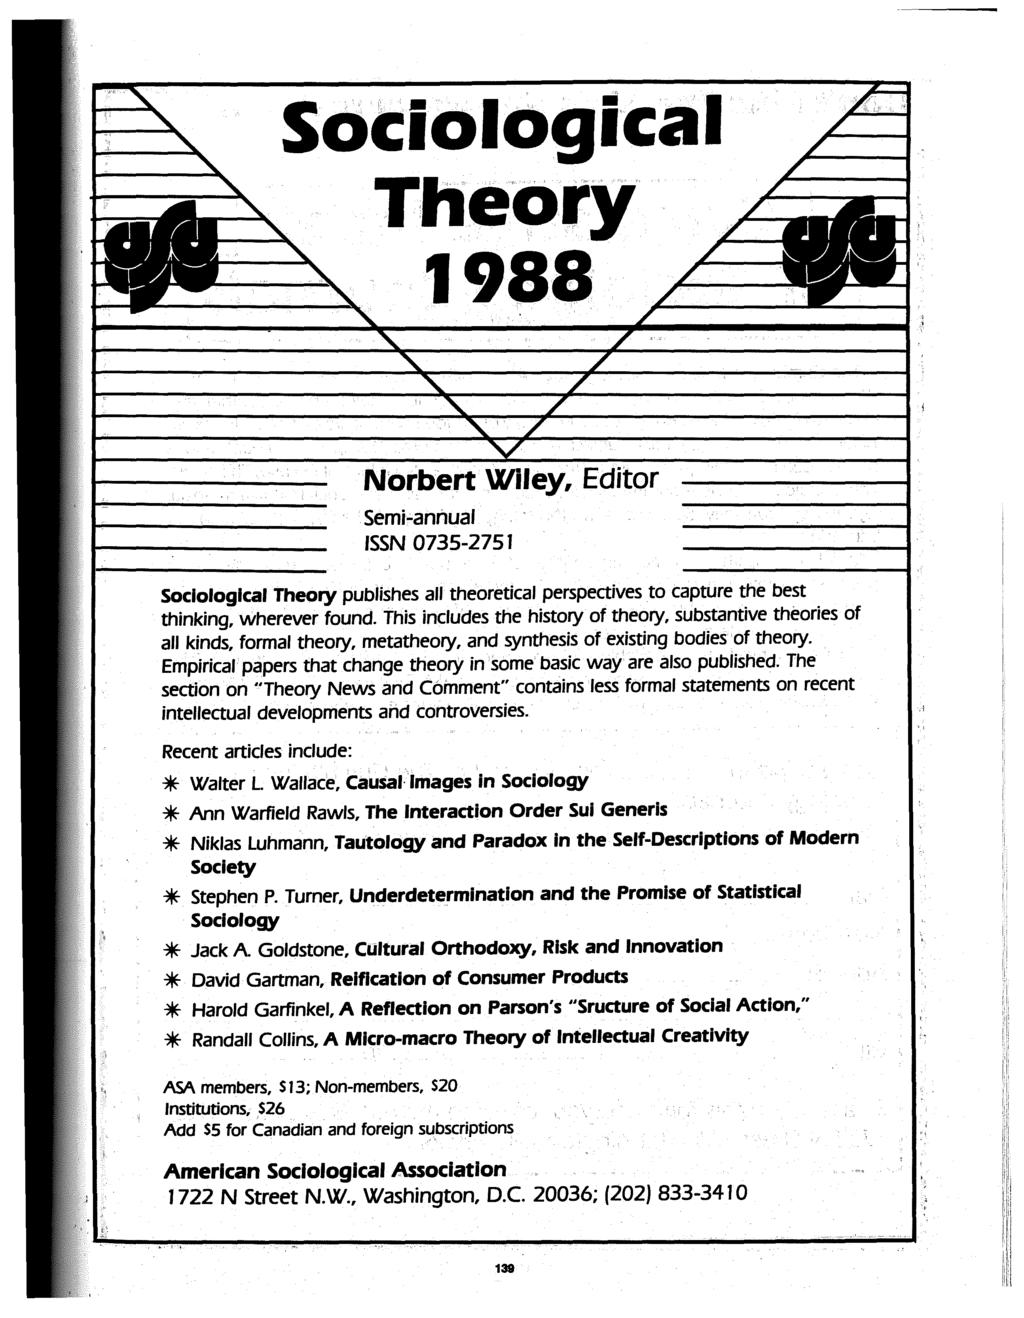 SoCiological Theory 1988 Norbert Wiley, Editor Semi-annual ISSN 0735-2751 Sociological Theory publishes all theoretical perspectives to capture the best thinking, wherever found.